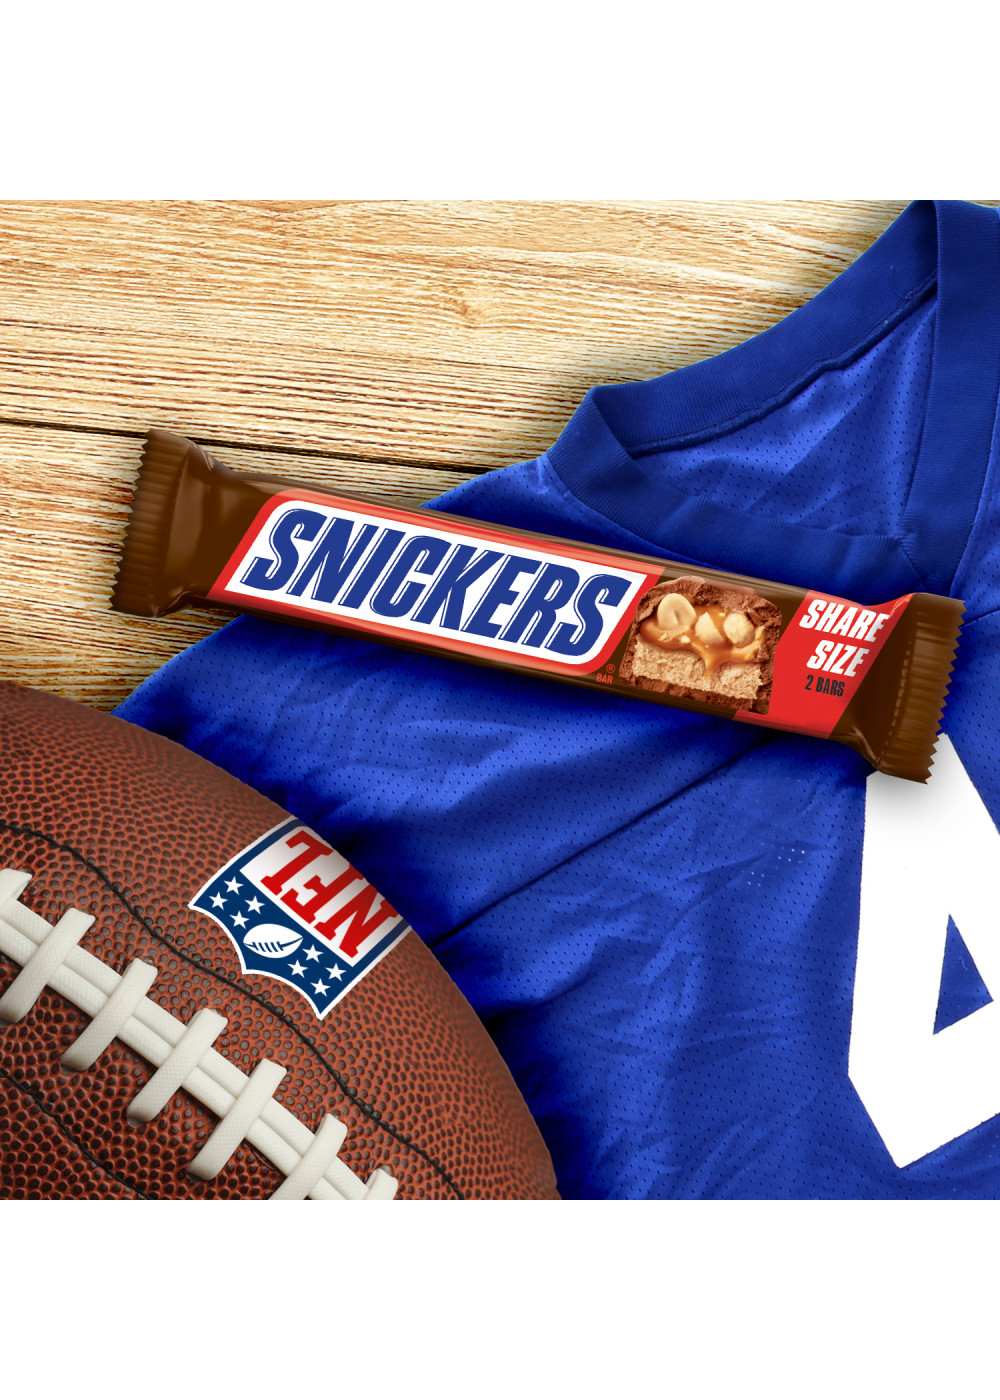 Snickers Milk Chocolate Candy Bar - Share Size; image 6 of 8